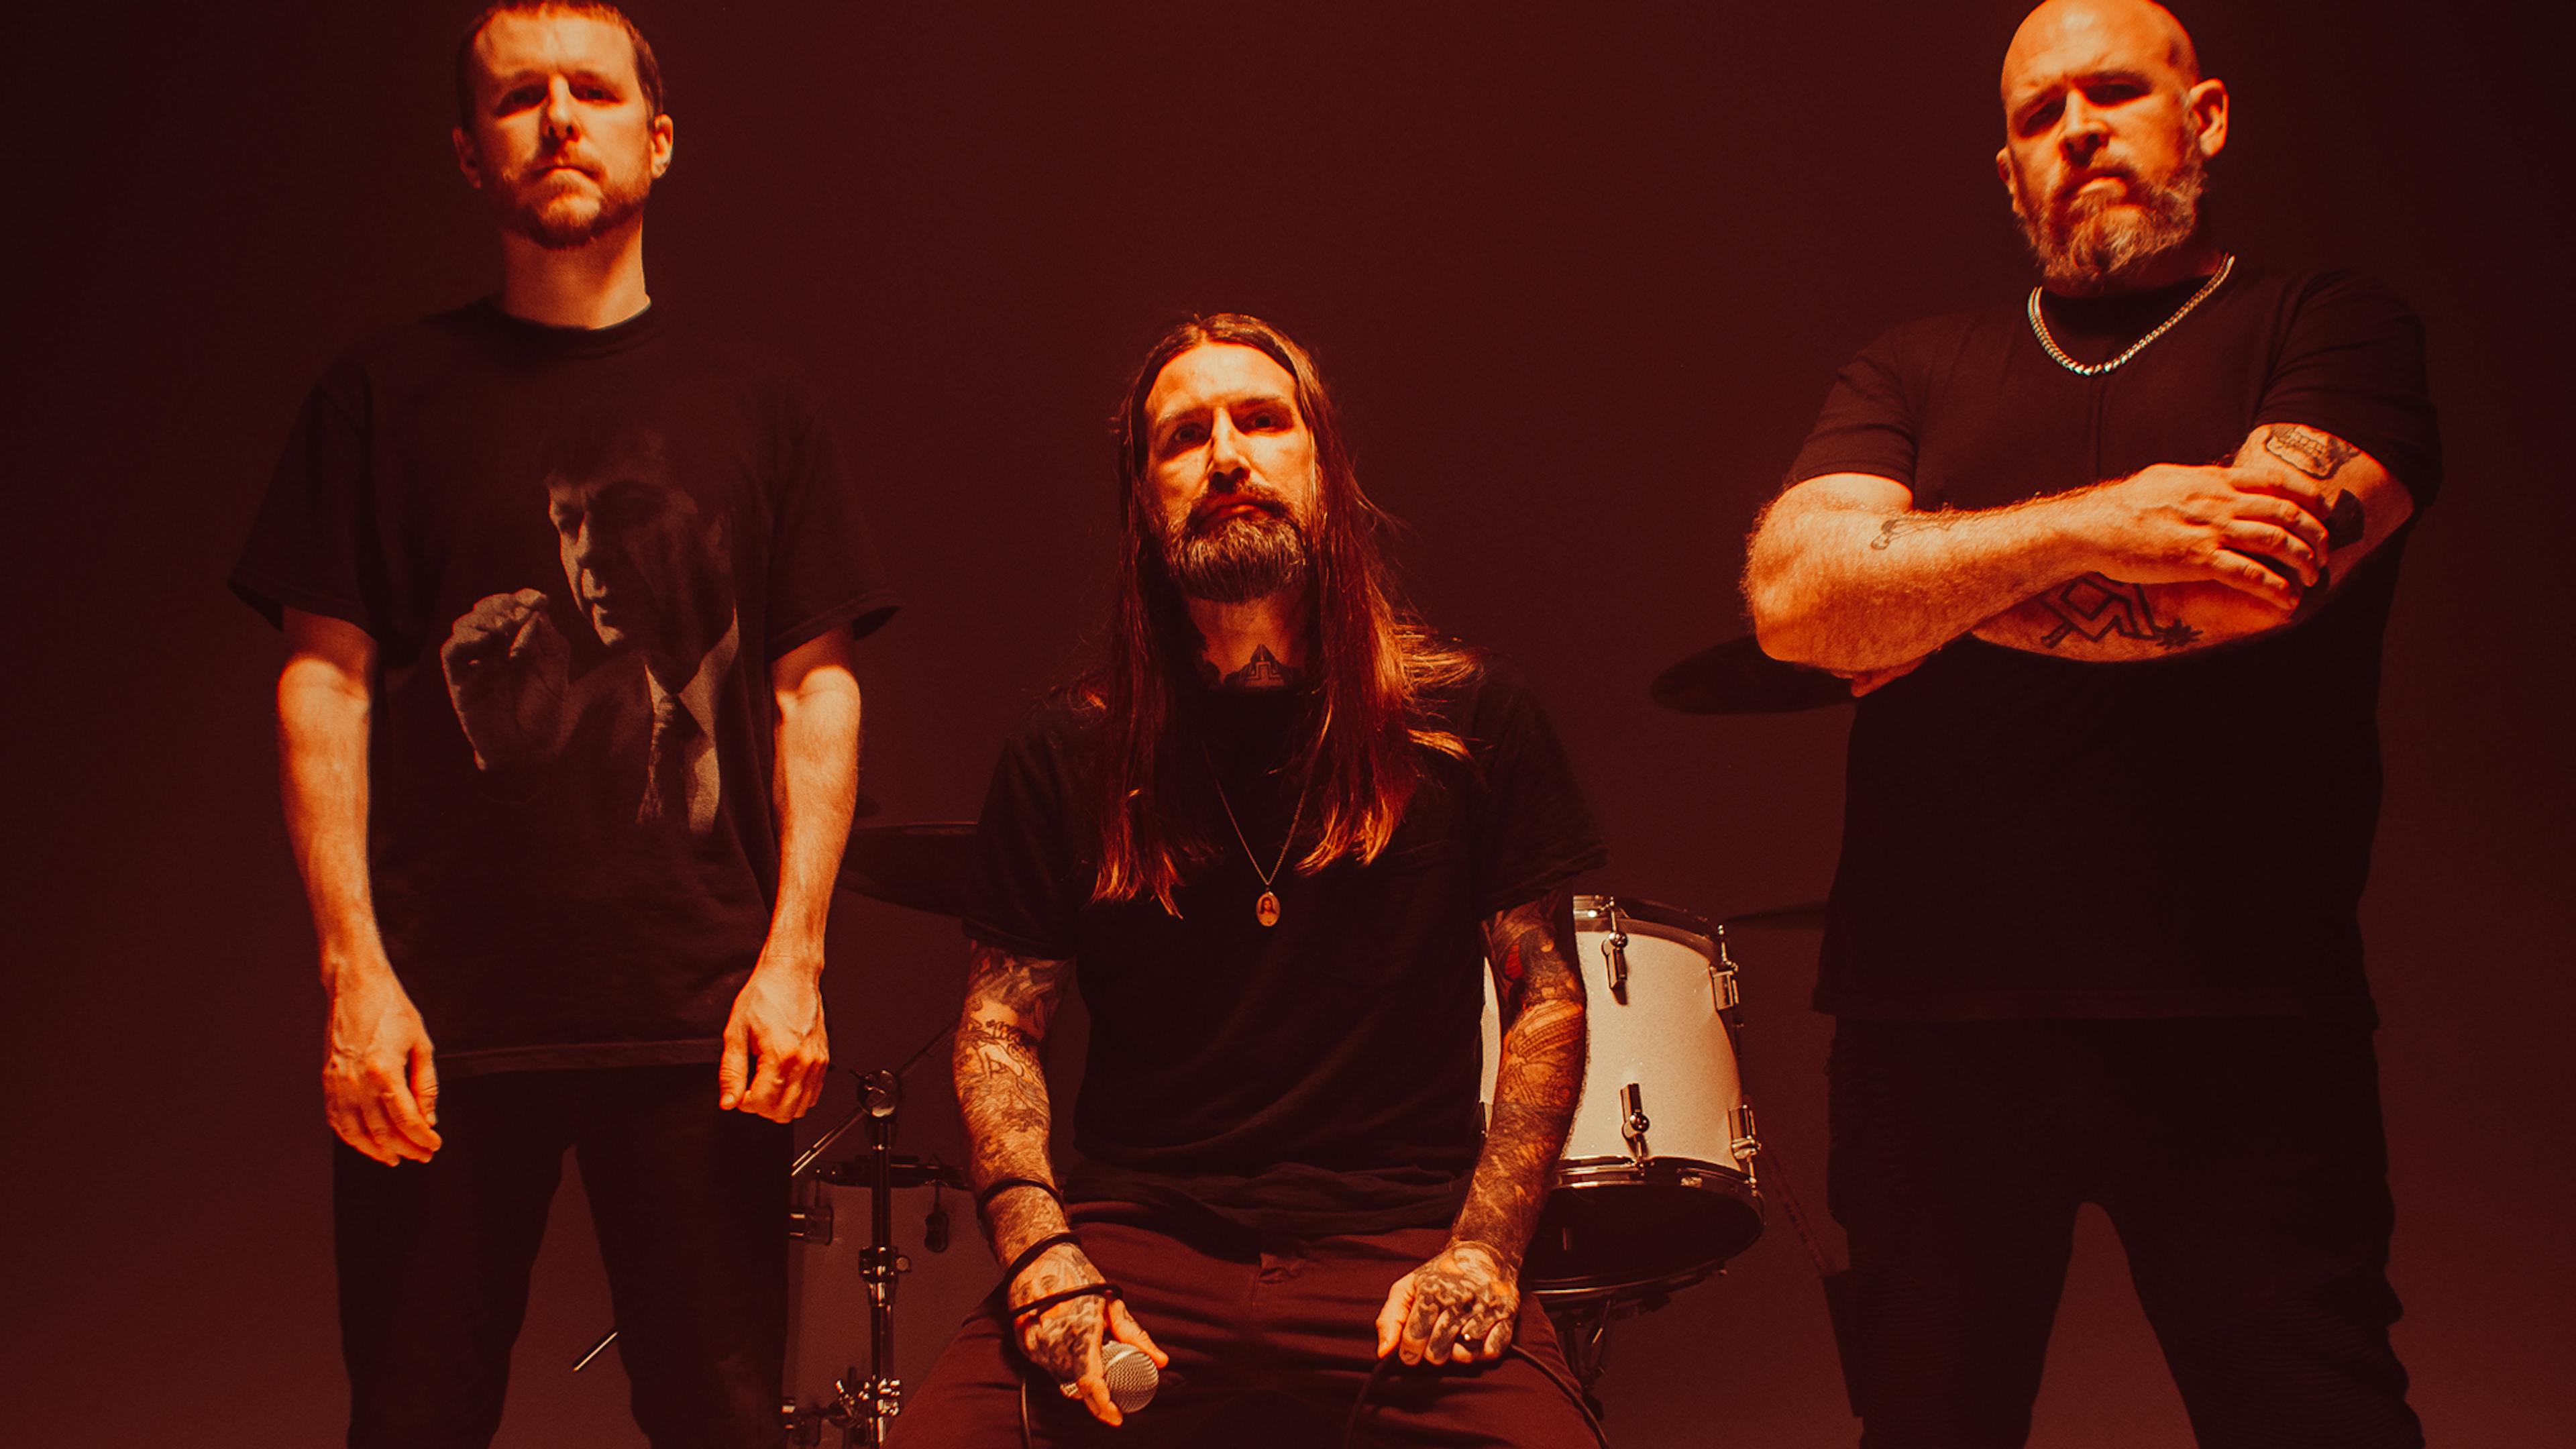 Keith Buckley’s new band Many Eyes share debut single, Revelation